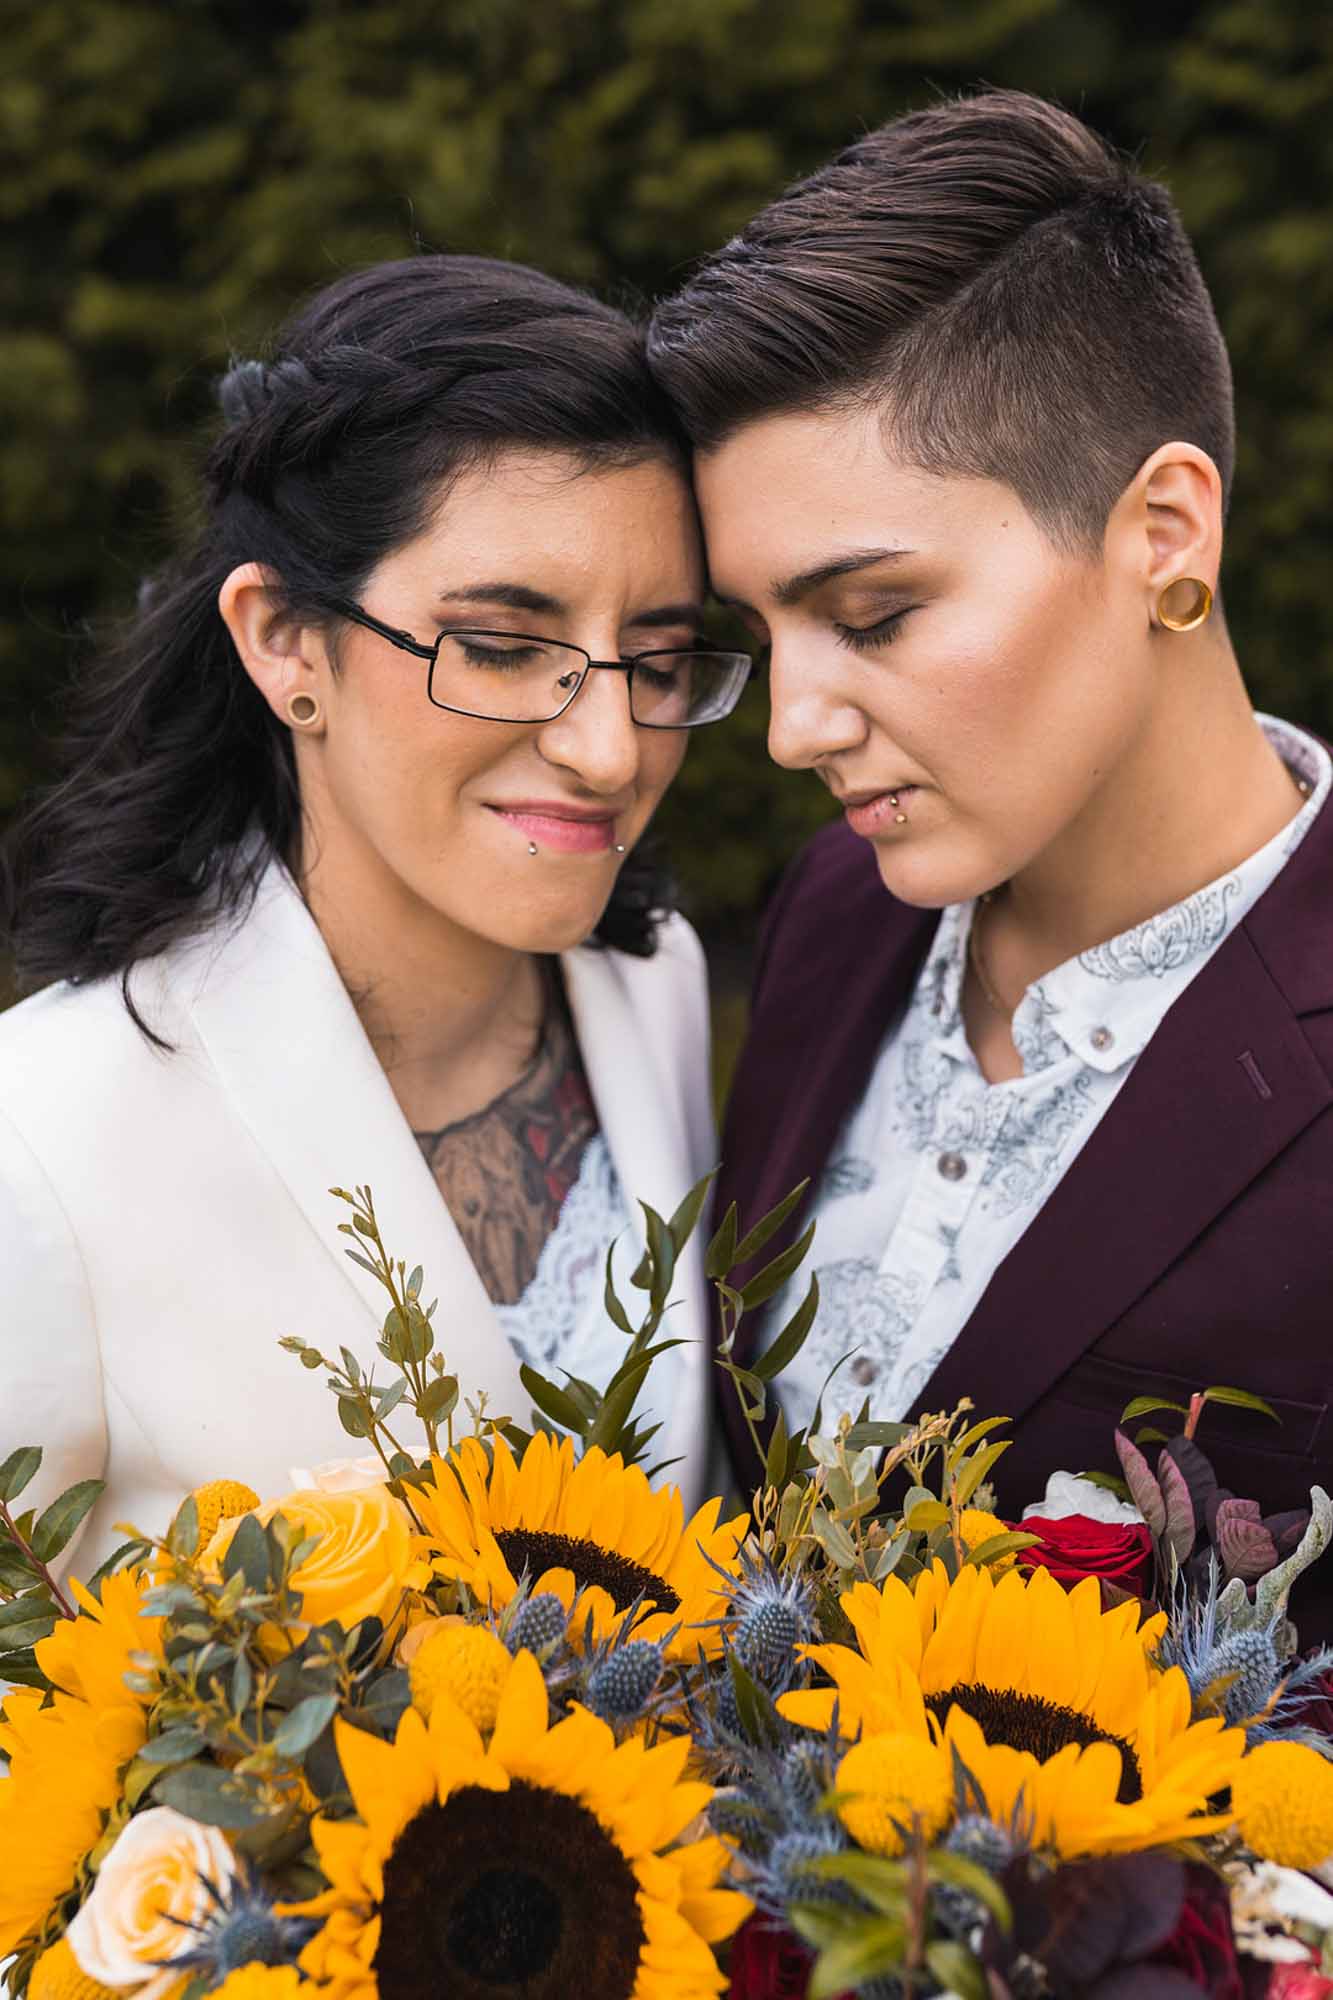 Outdoor New Jersey wedding filled with love and sunflowers | Dawnpoint Studios | Featured on Equally Wed, the leading LGBTQ+ wedding magazine